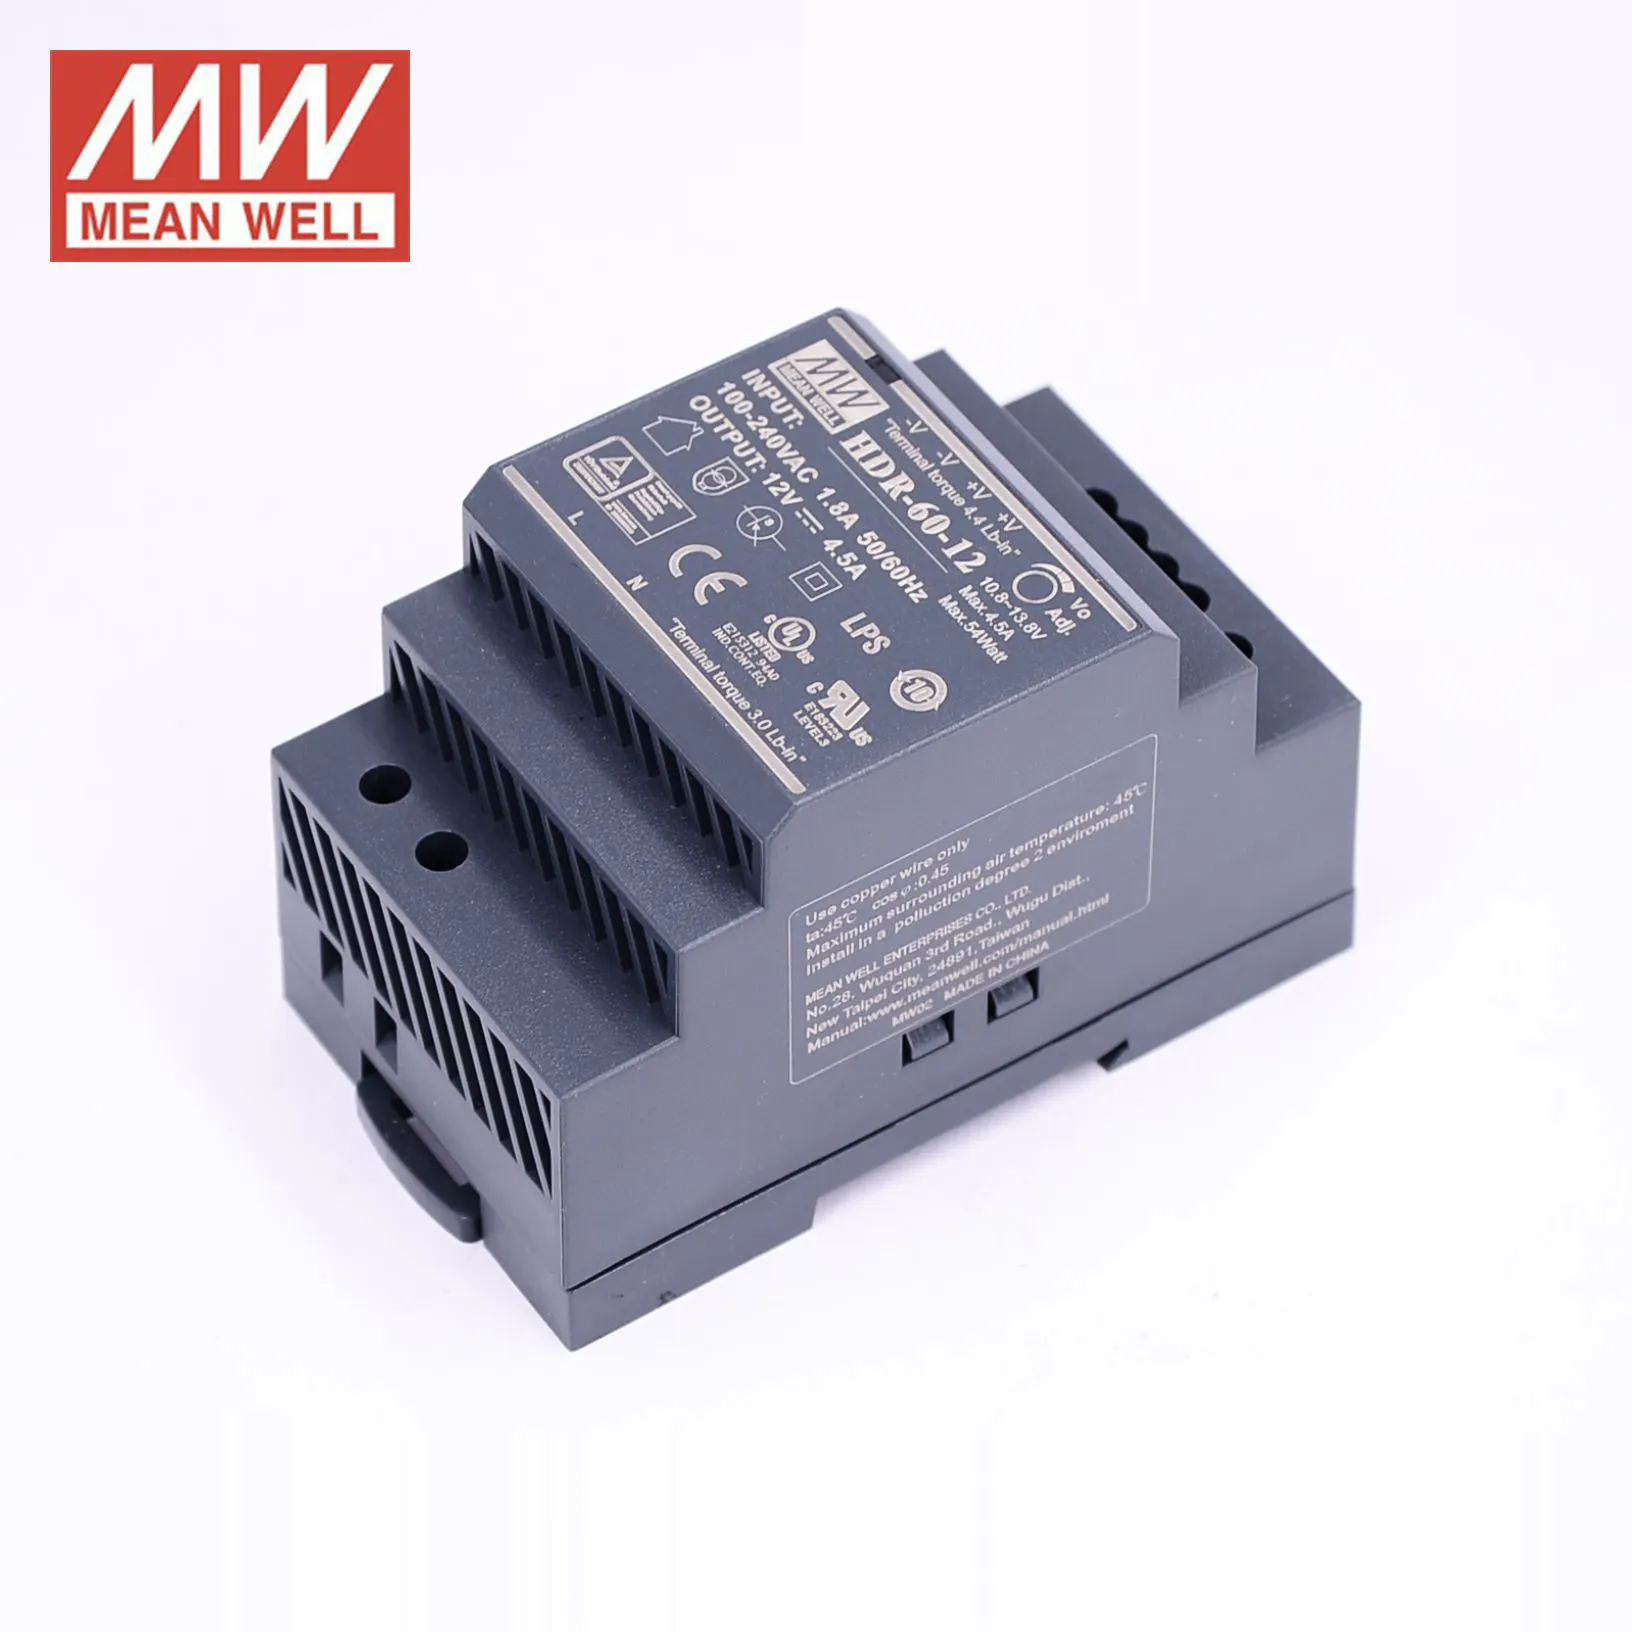 SMPS Mean Well HDR-60-12, 60W 12V 4.5A AC-DC Ultra Slim Step Bentuk DIN Rail Switching Power Supply